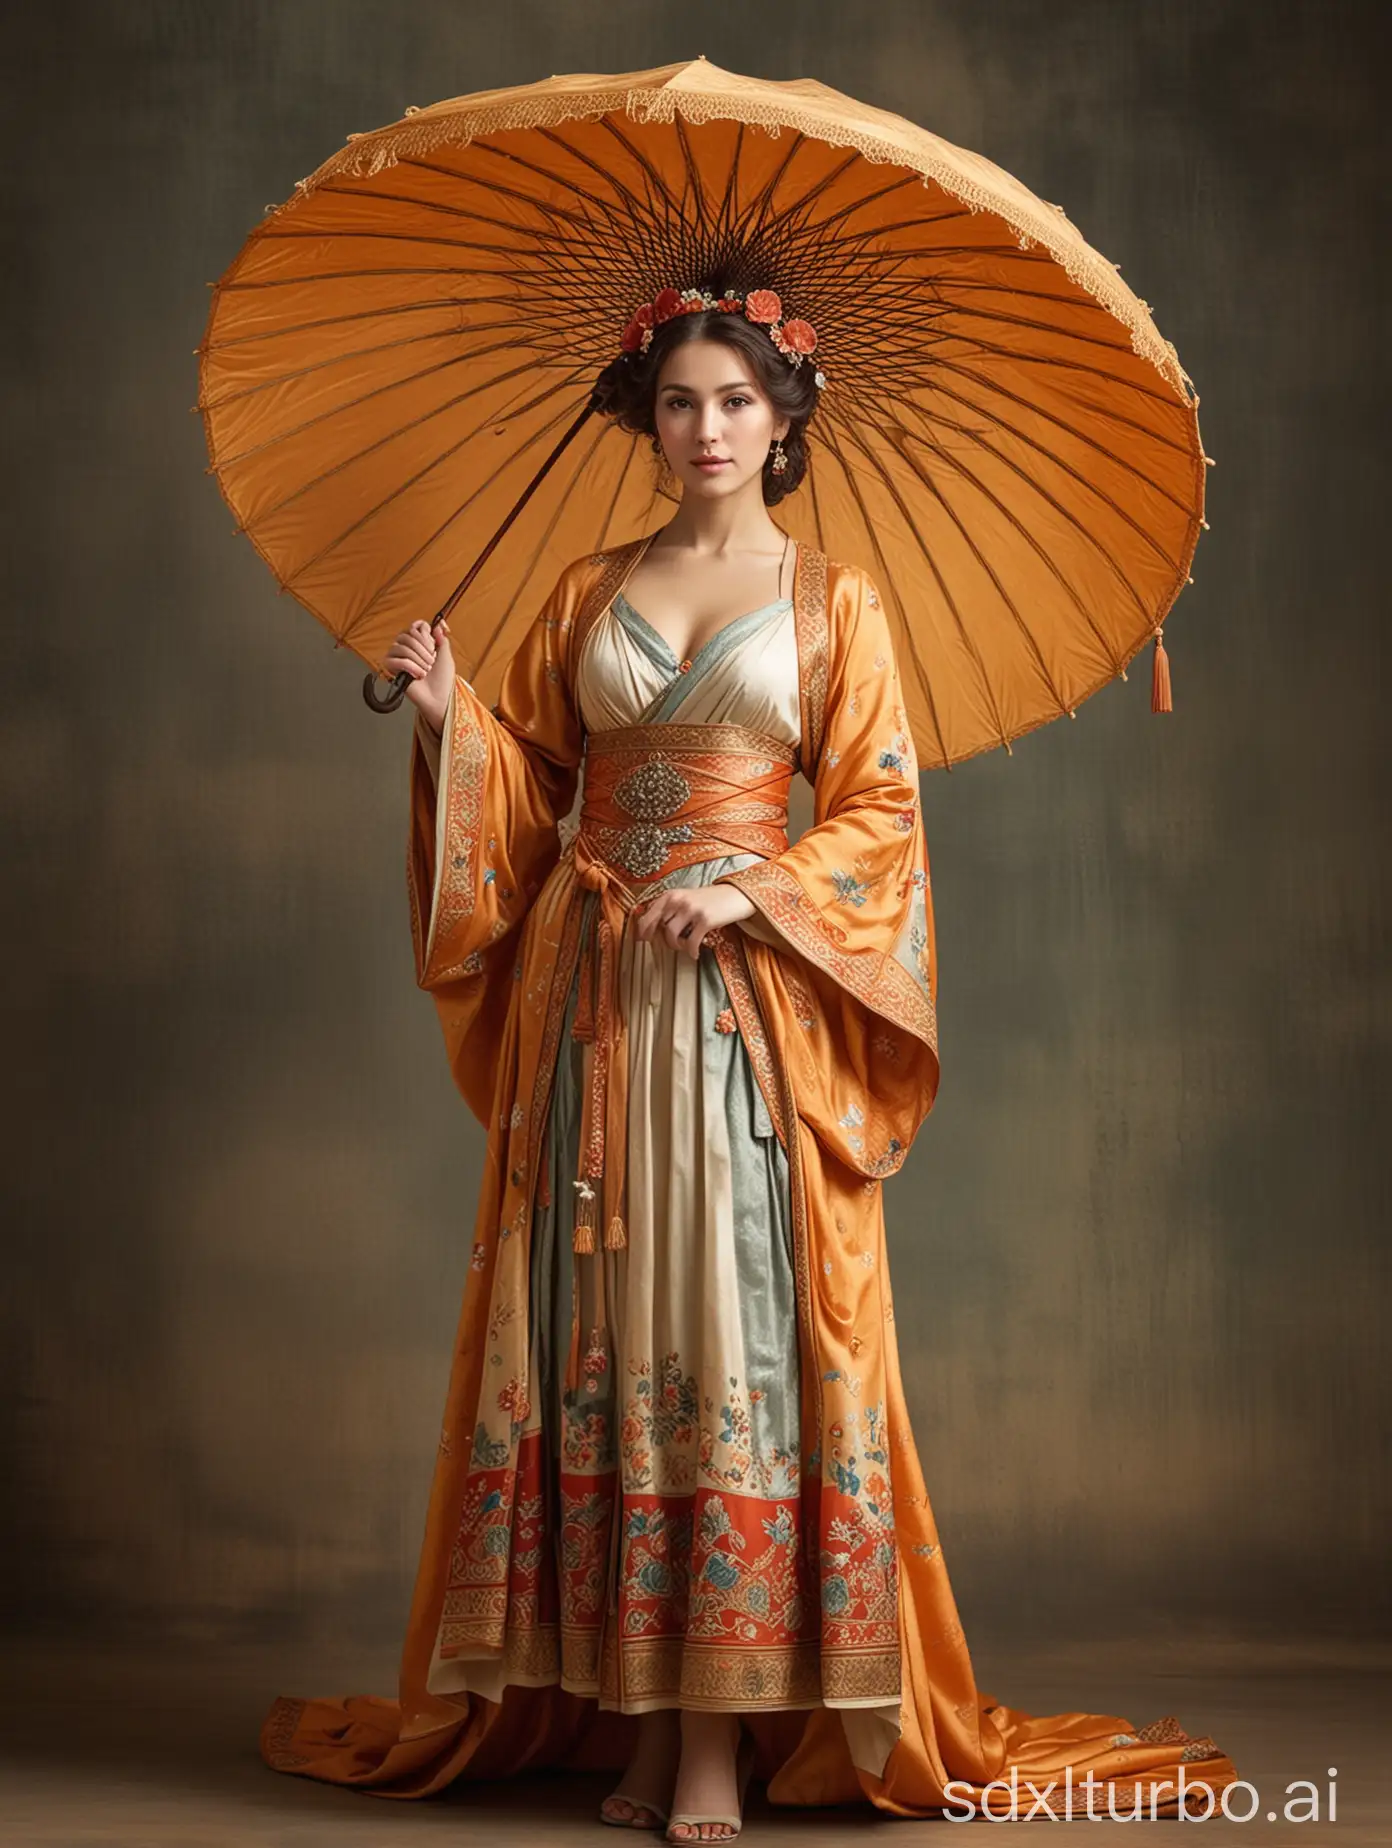 Ancient-Costume-Beauty-with-Umbrella-in-Historical-Setting